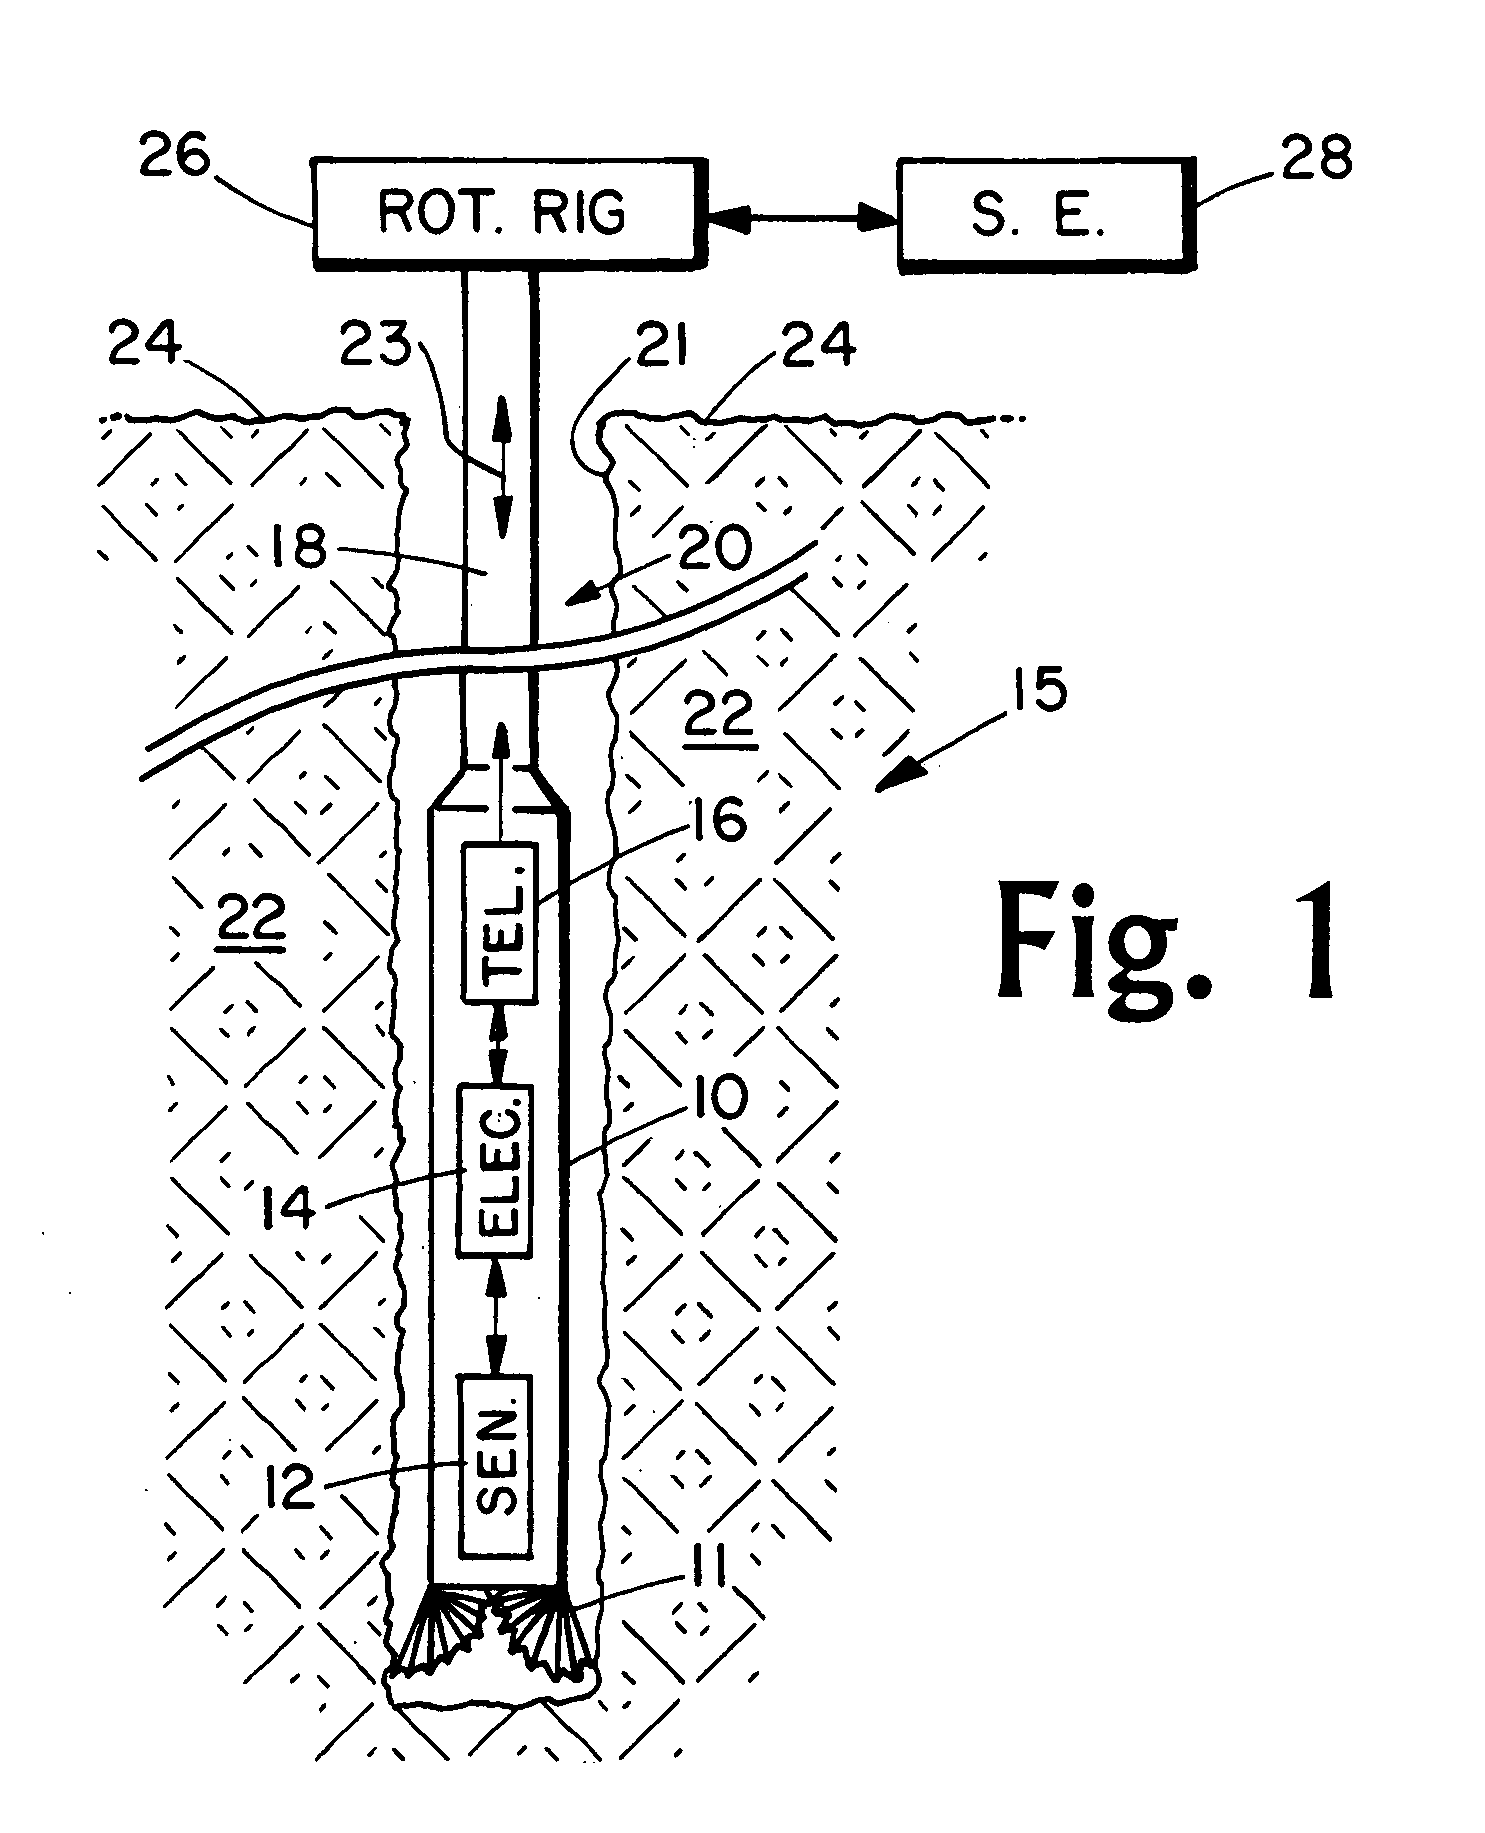 Gain stabilization apparatus and methods for spectral gamma ray measurement systems